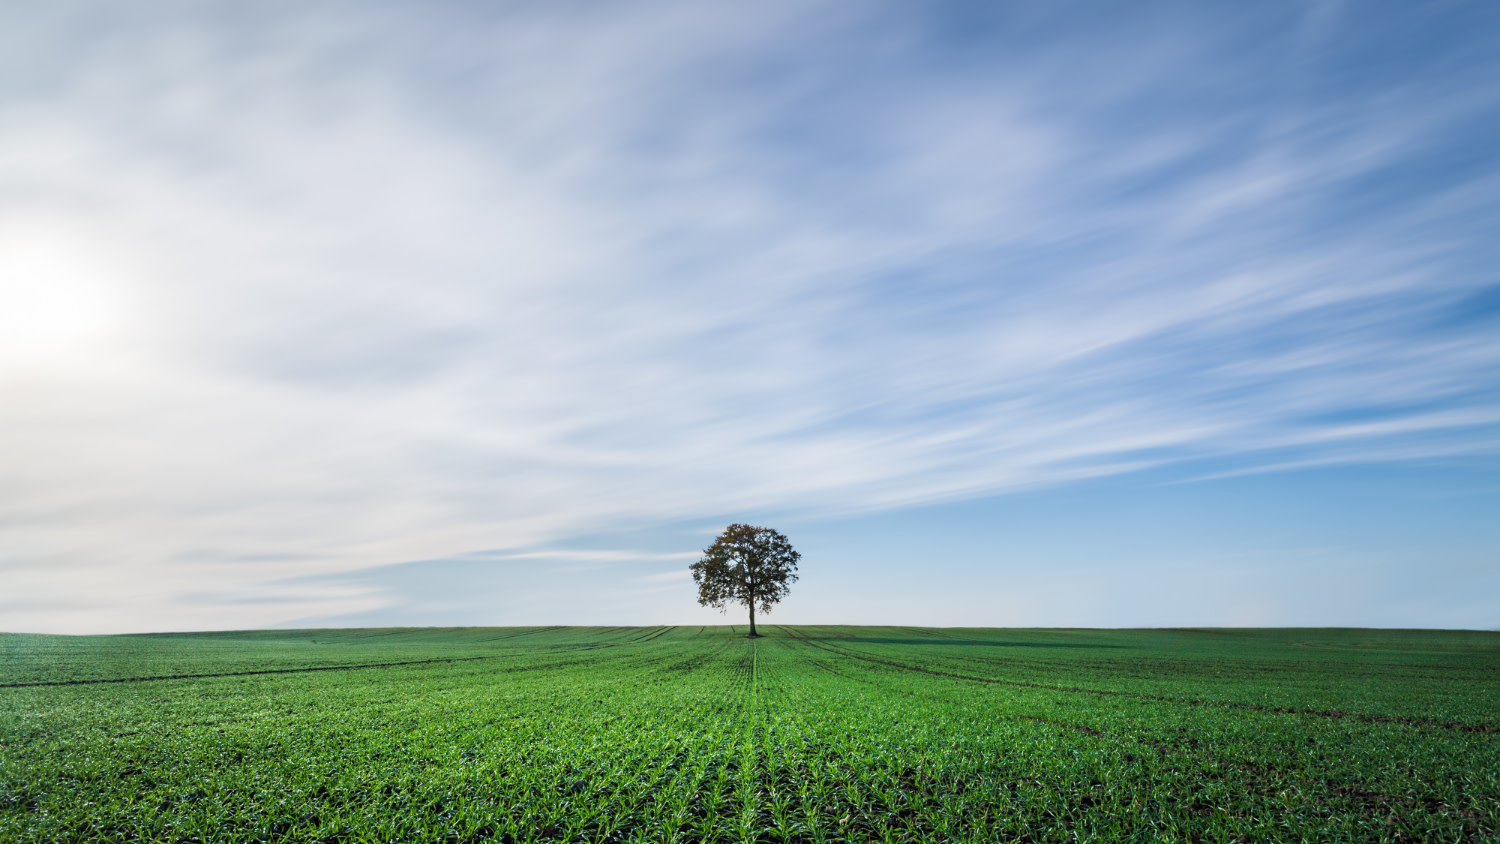 Image of farm field with single tree under blue cloudy sky